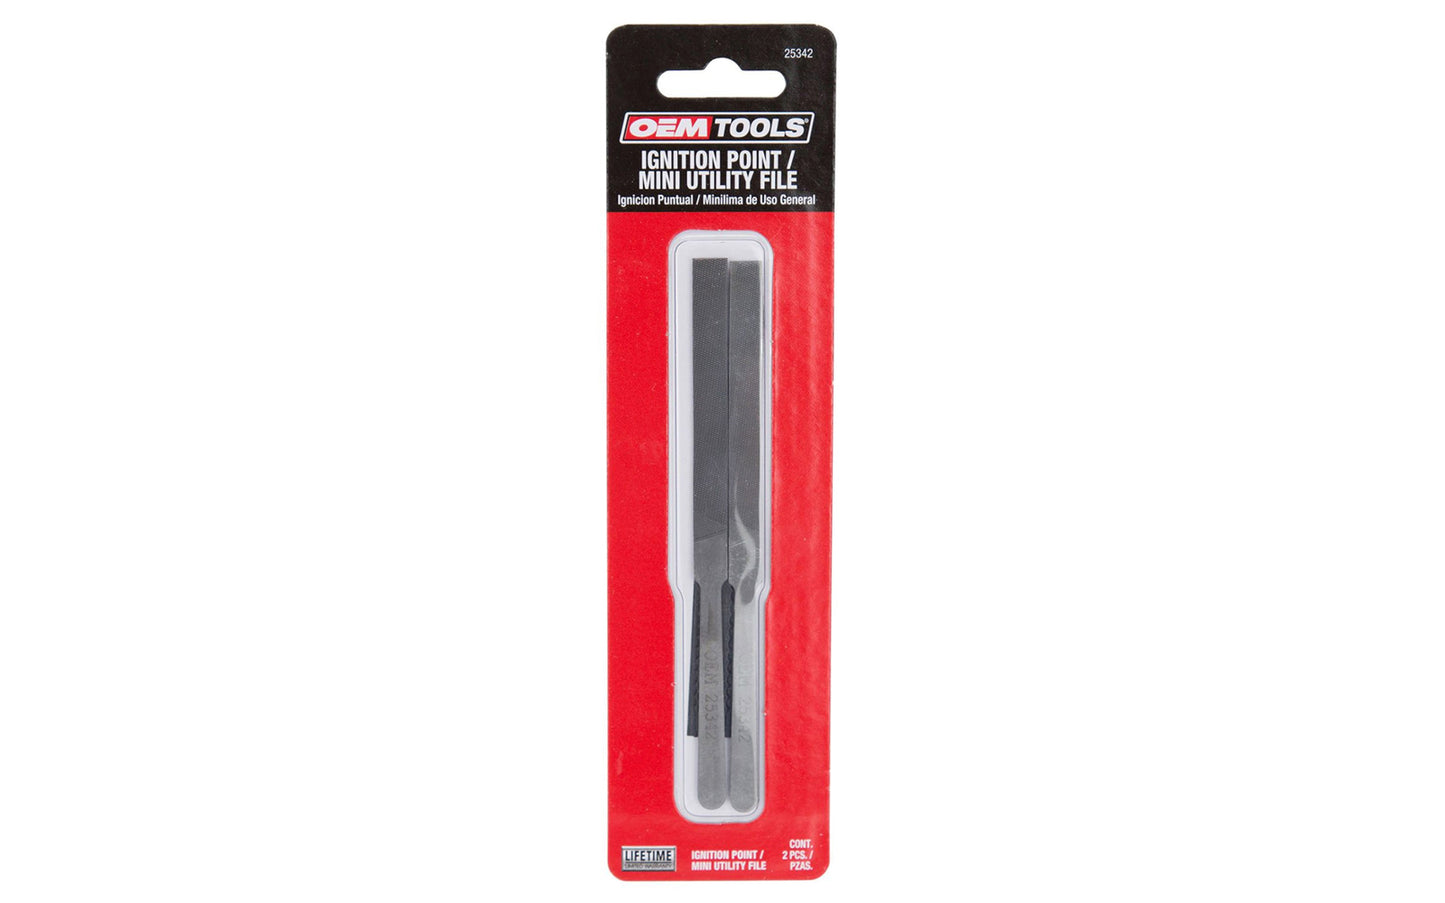 Ignition / Utility File - 2 Pack. Mini Ignition Point Utility File feature long, thin blades that file points on spark plugs and other small objects. They are great for dressing contact points. Made by Oemtools. Model 25342.